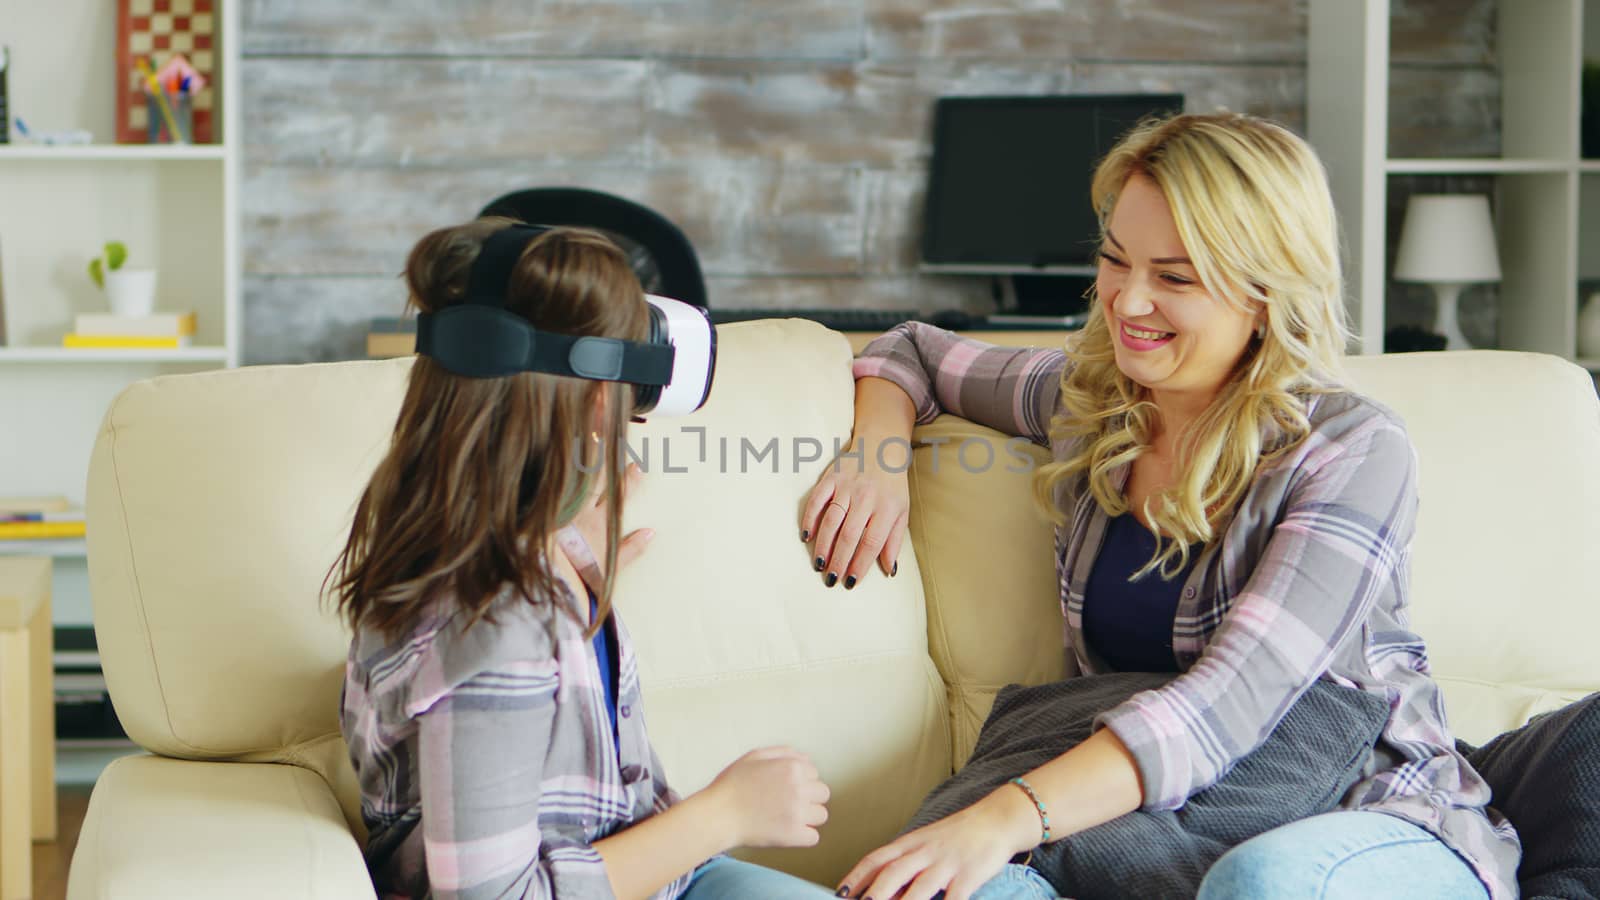 Excited little girl about her virtual reality headset by DCStudio